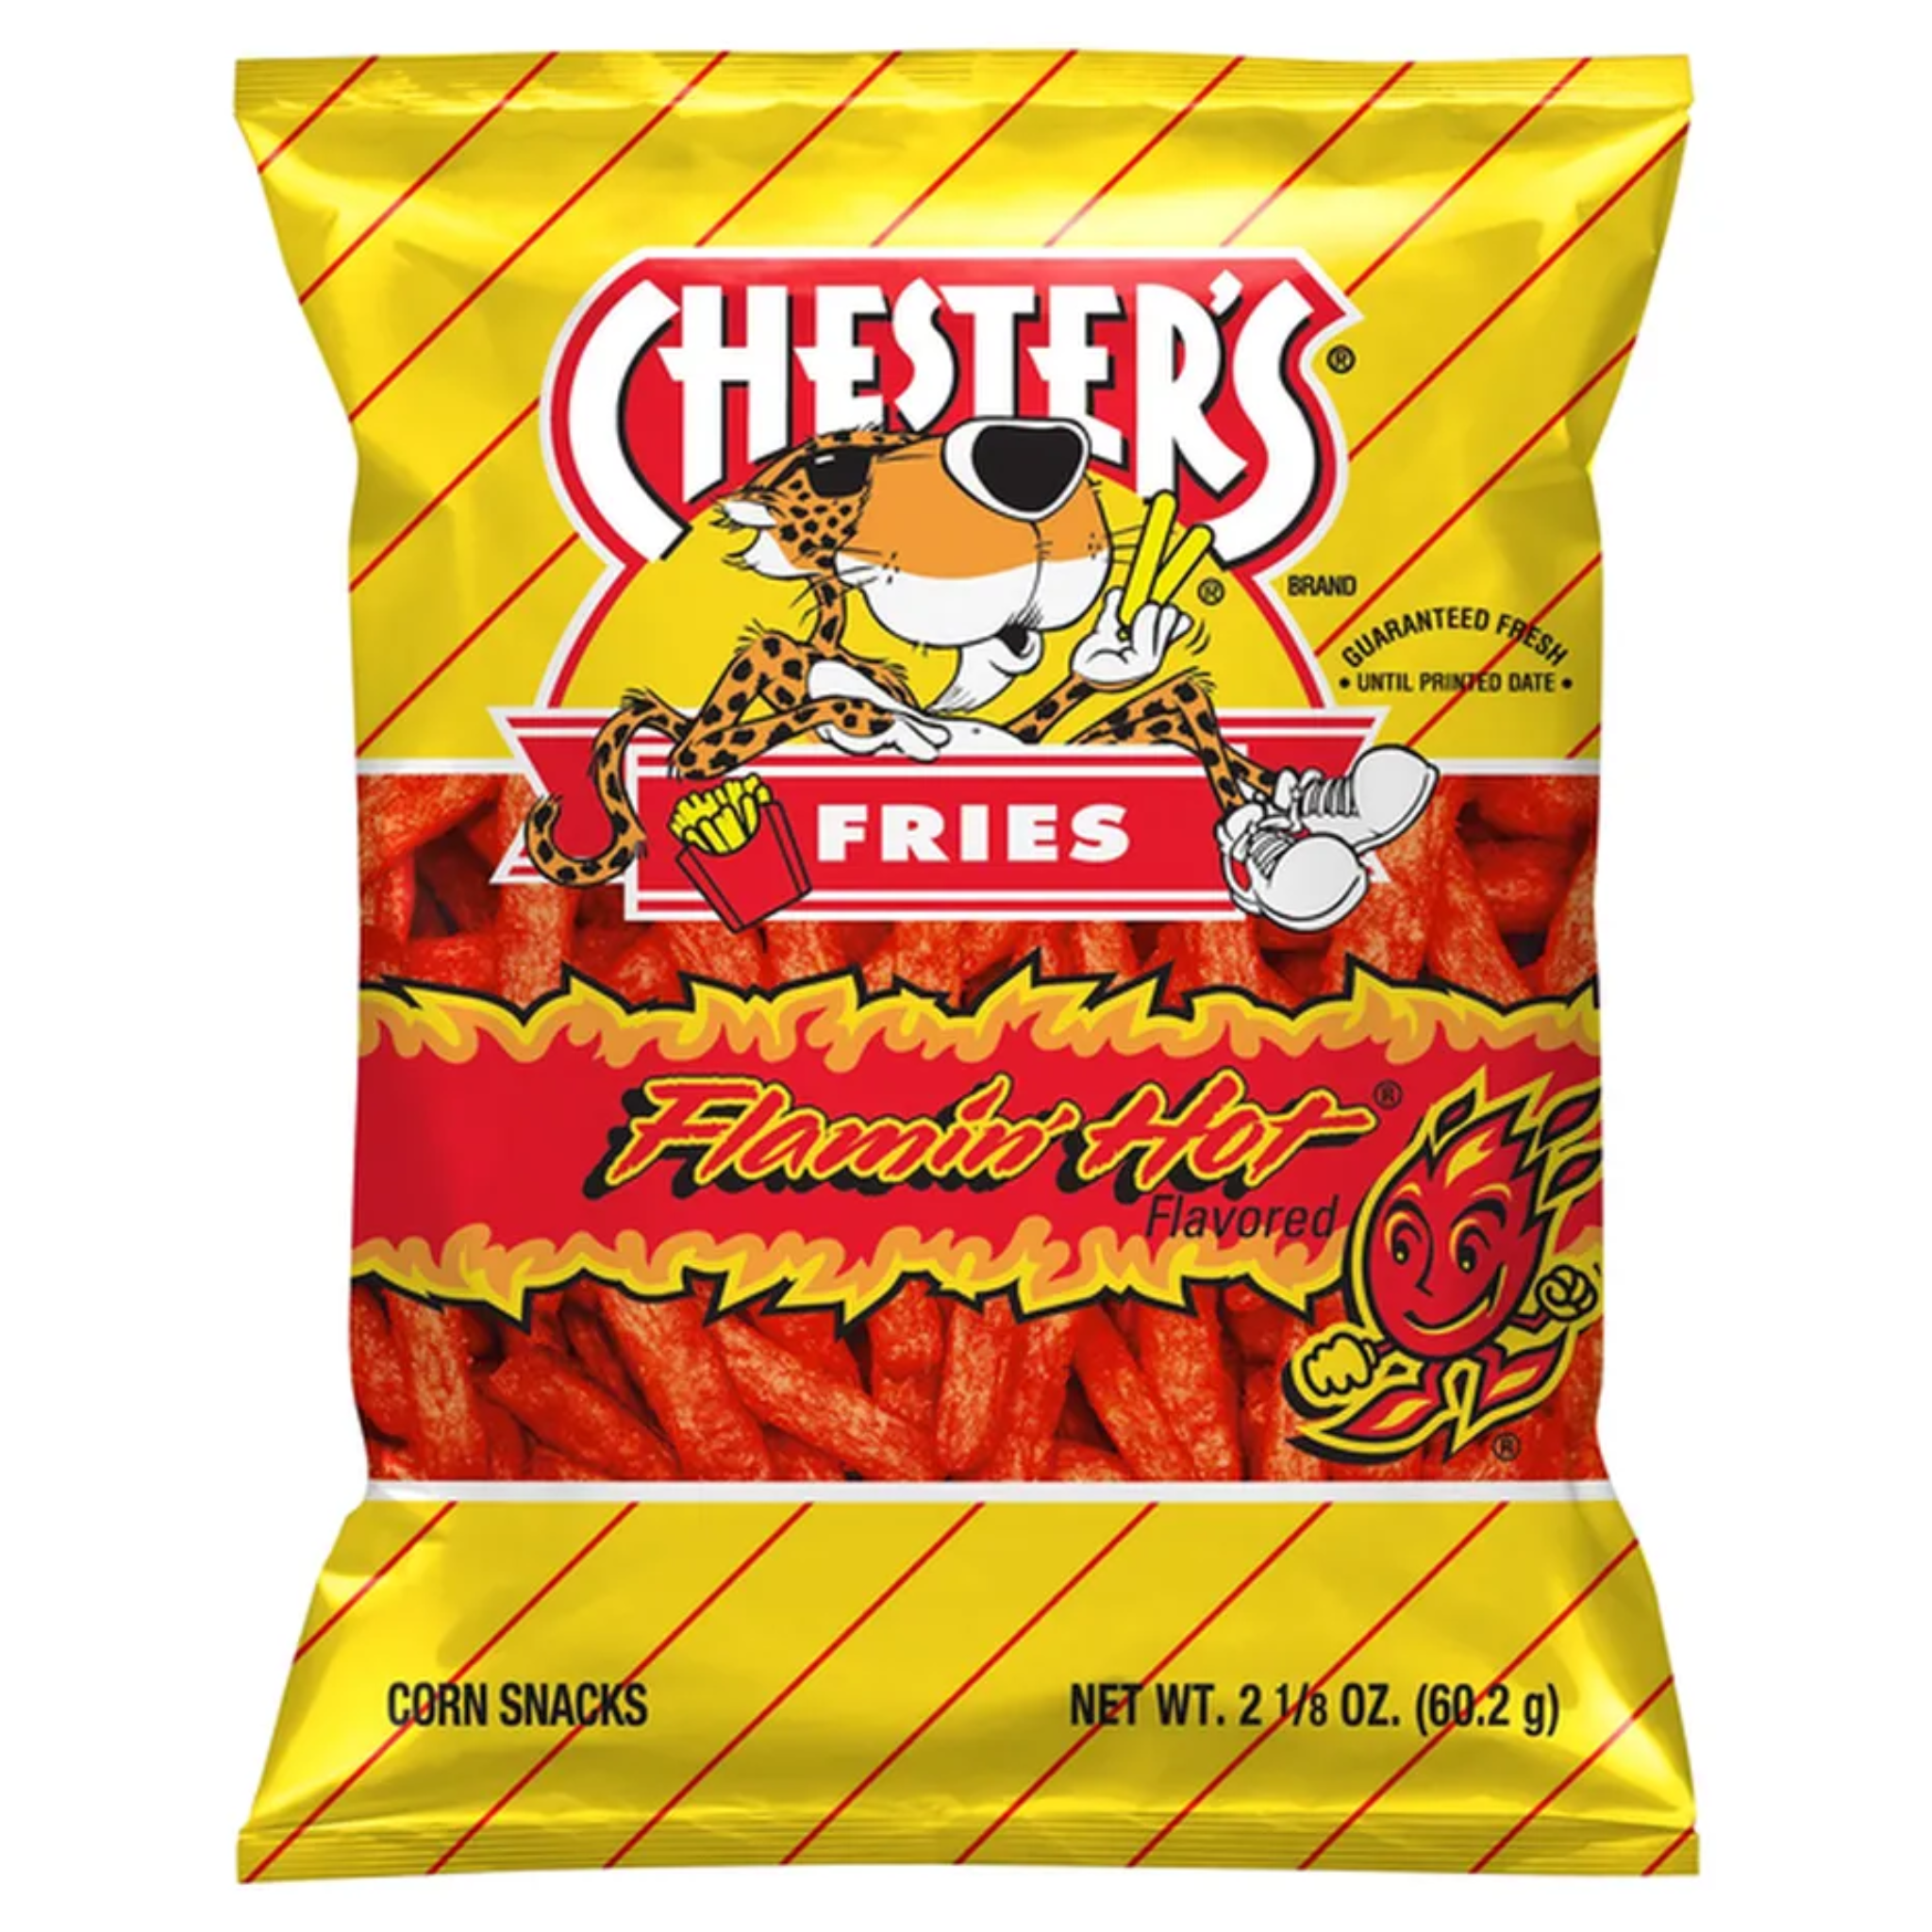 Cheesters Fries Flamin Hot 2oz